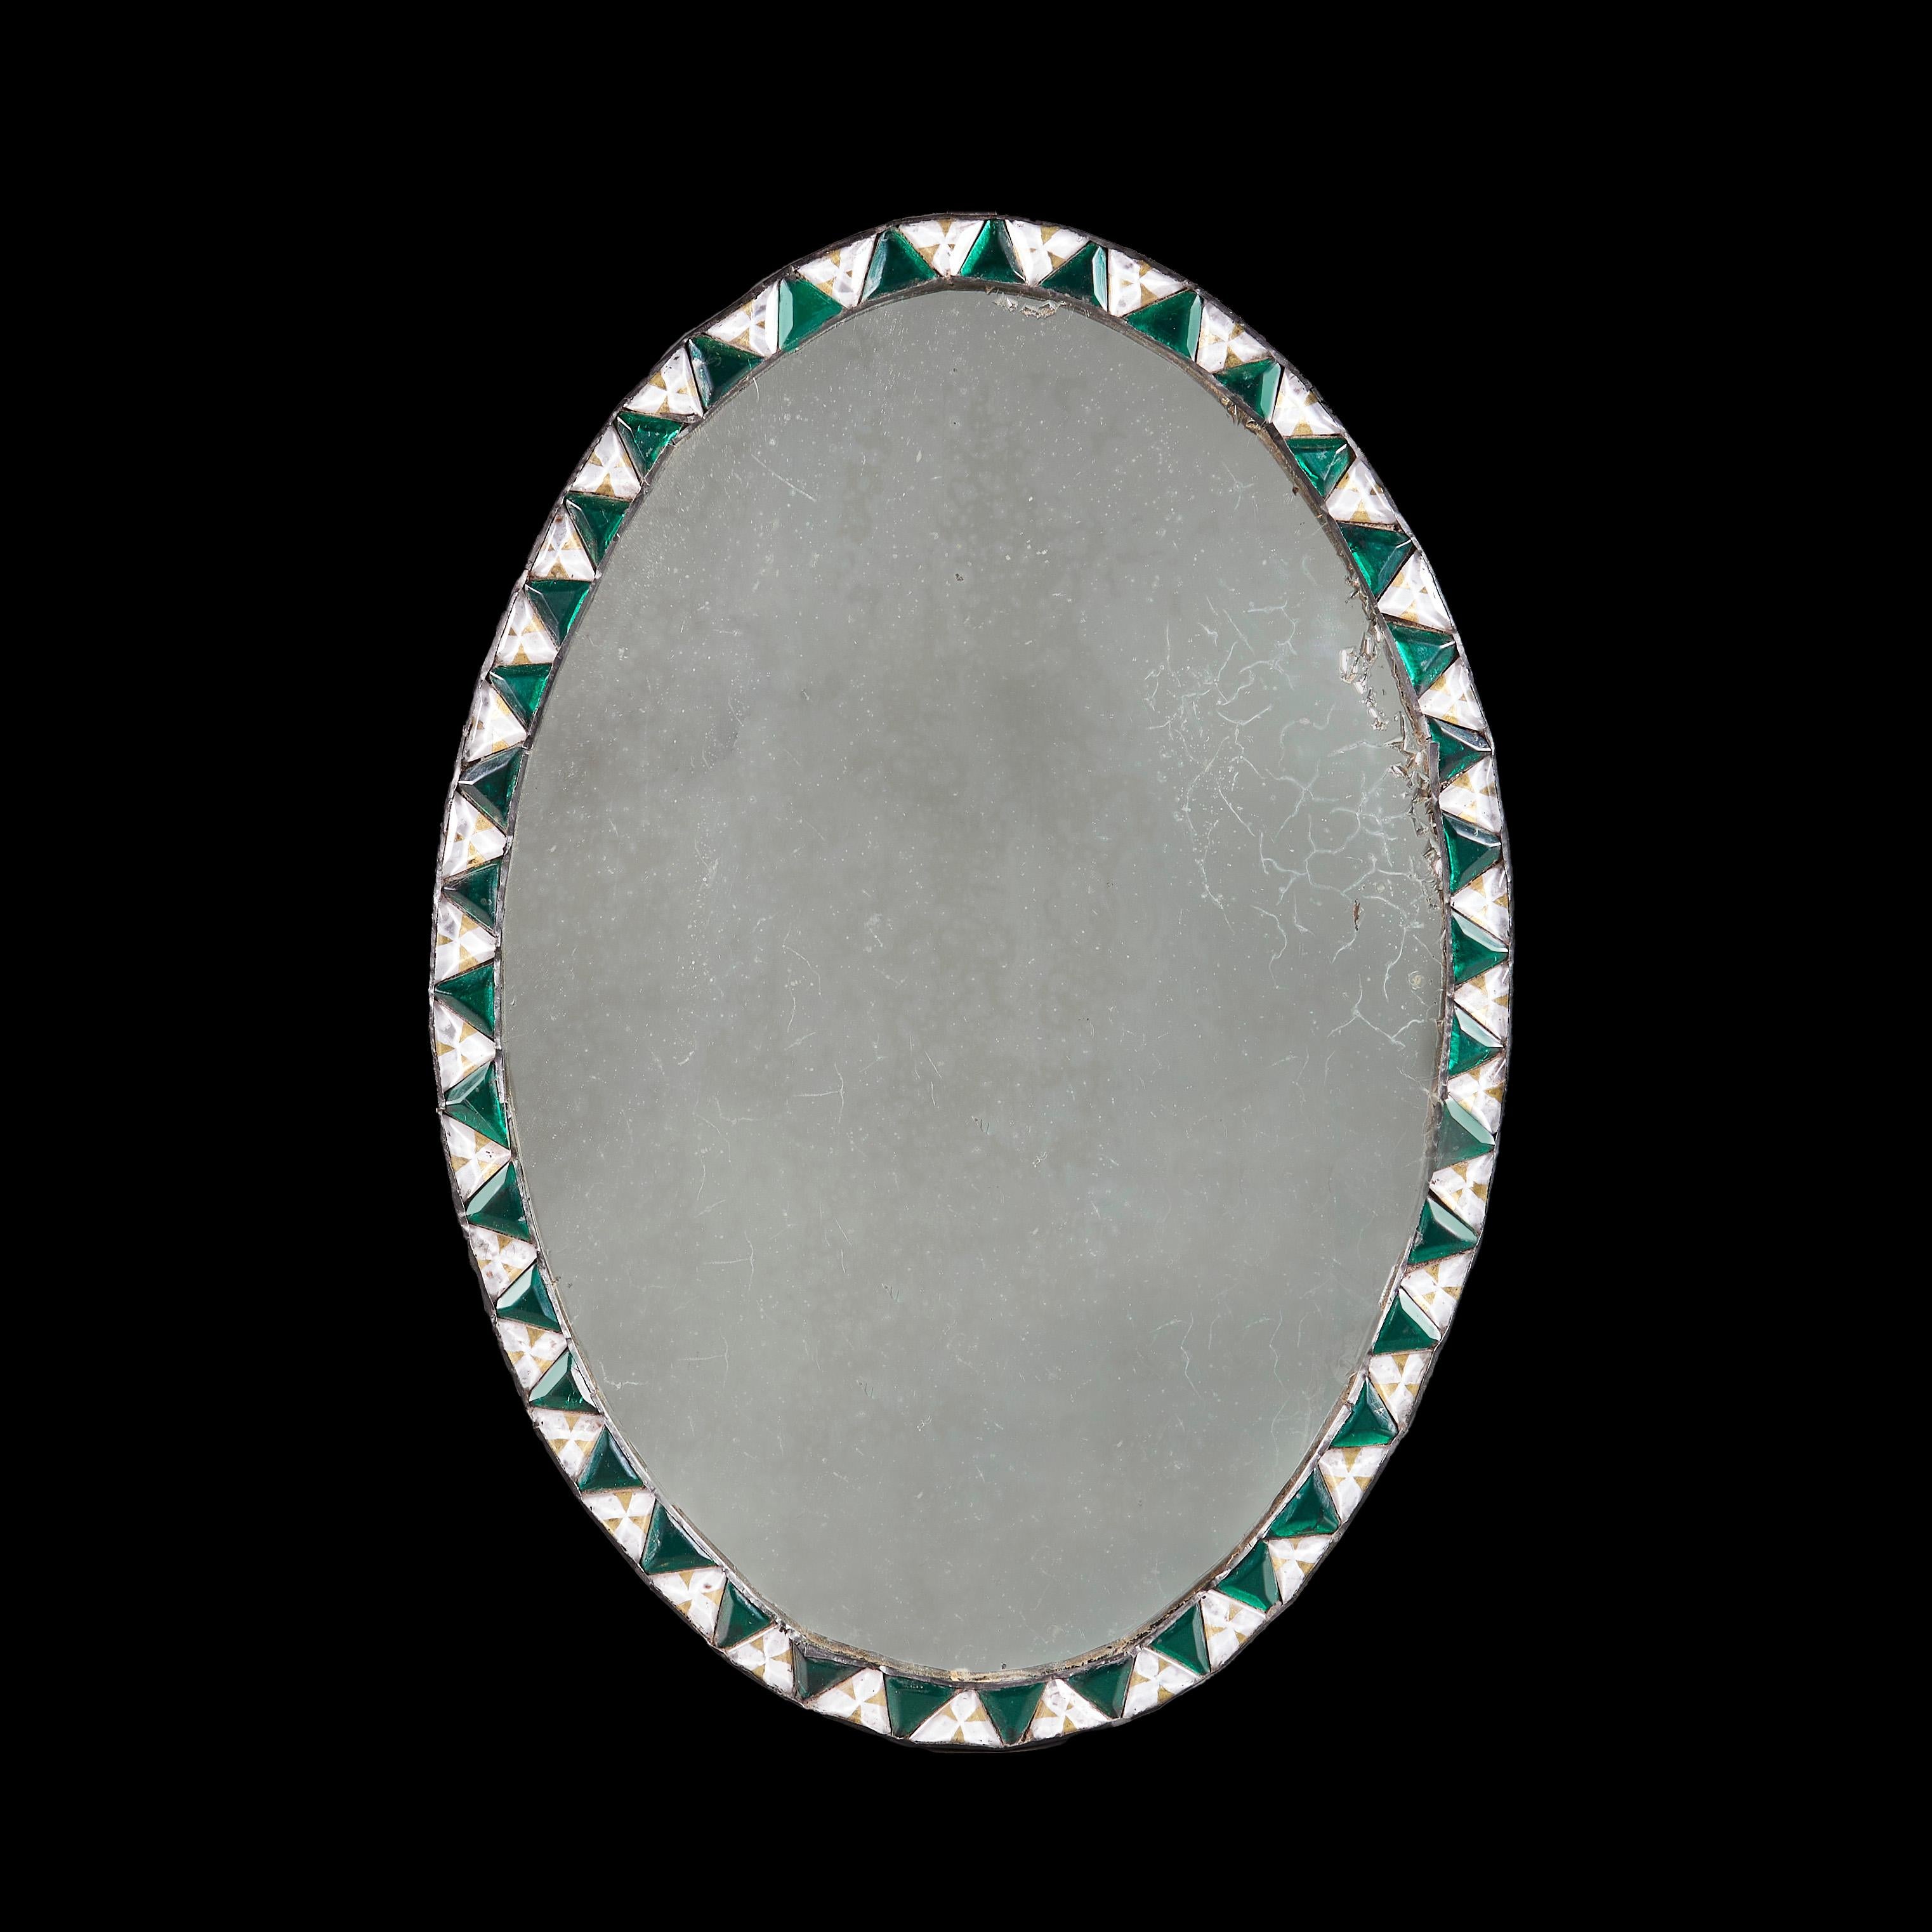 Ireland, circa 1900

An early twentieth century oval mirror with alternating losenges of cut glass beads in green and clear glass with heavily oxidised mercury mirror plate.

Height 60.00cm
Width 42.00cm.